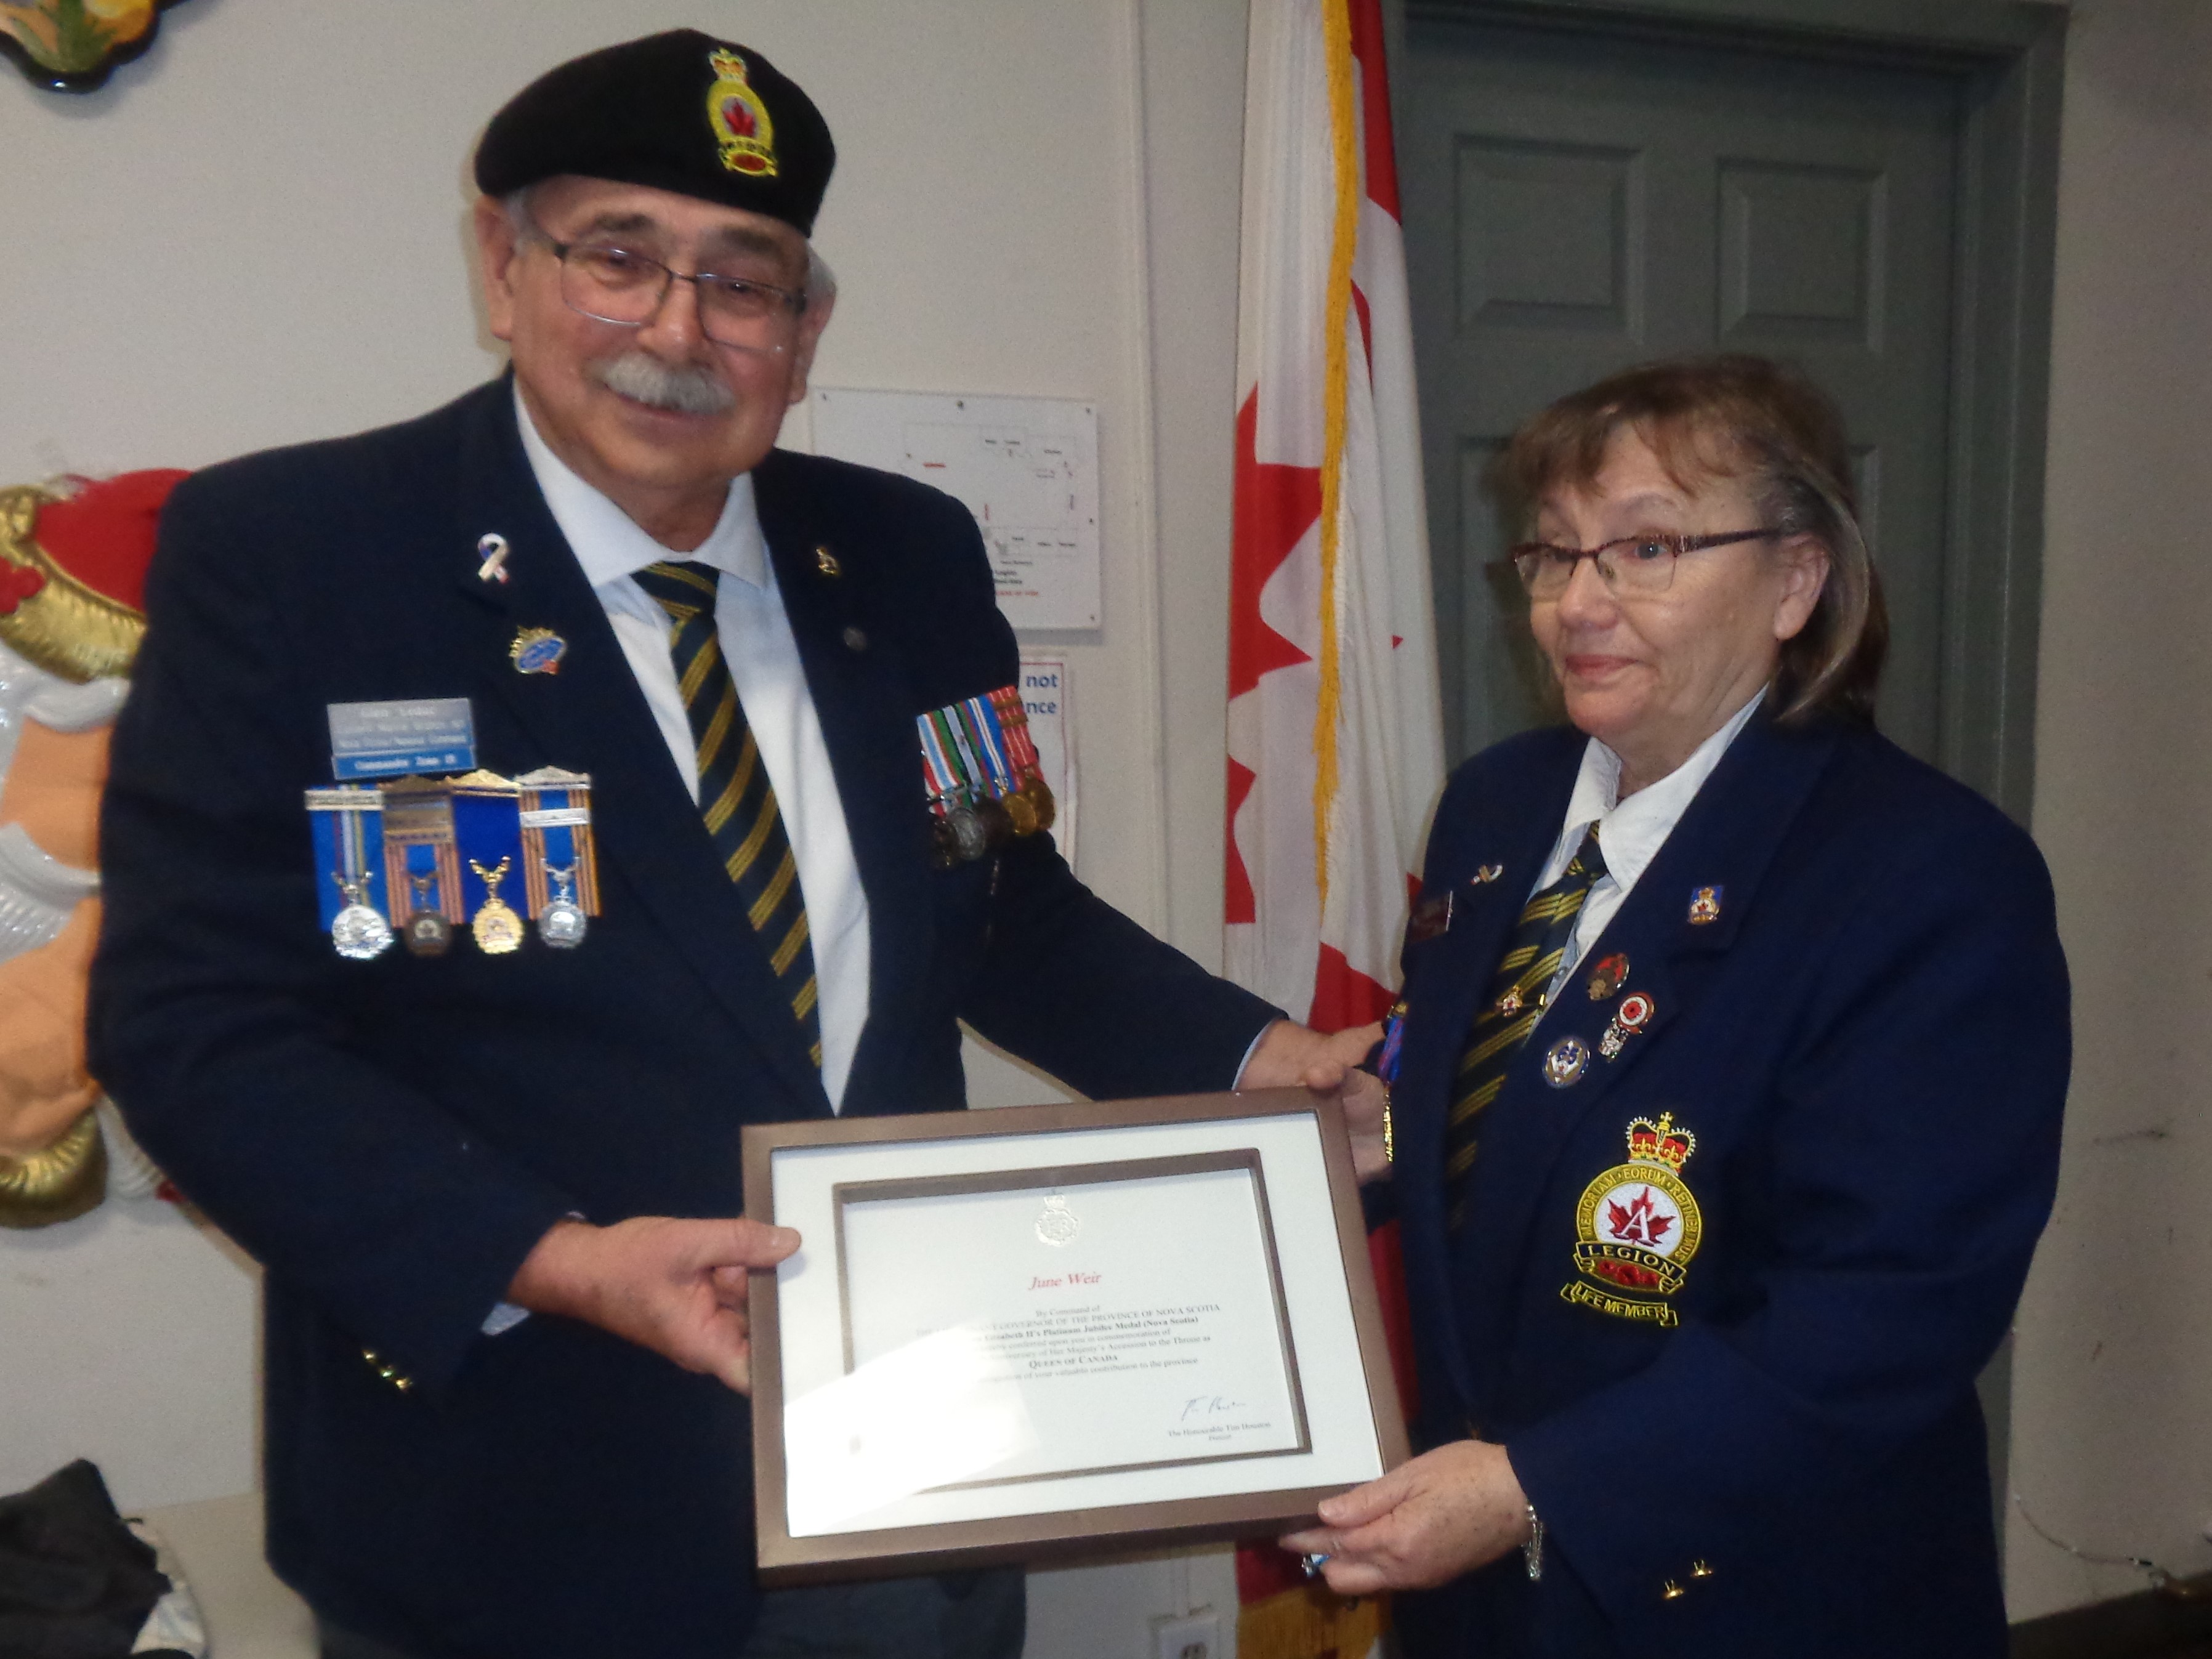 Zone 15 Commander Glen Leduc presented the Bedford Br. 95 award of the Queen’s Platinum Jubilee medal to Treasurer June Weir following the Dec 12, 2022 Branch elections